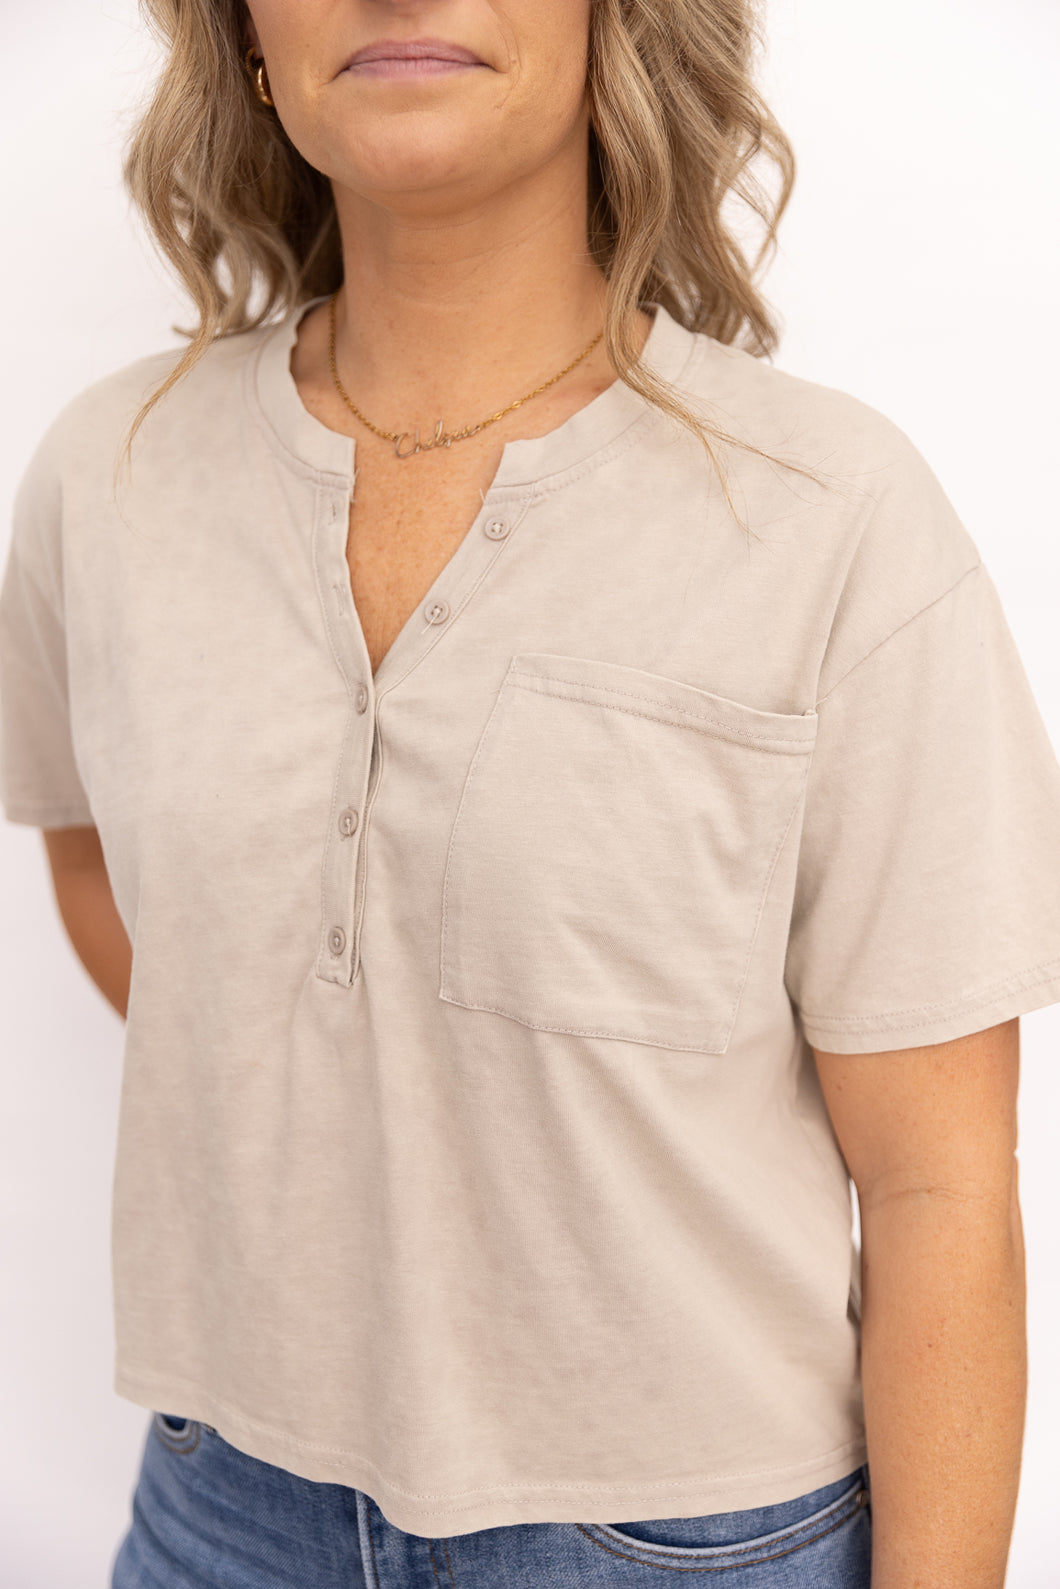 Ellie Stone Button Up Knit Top